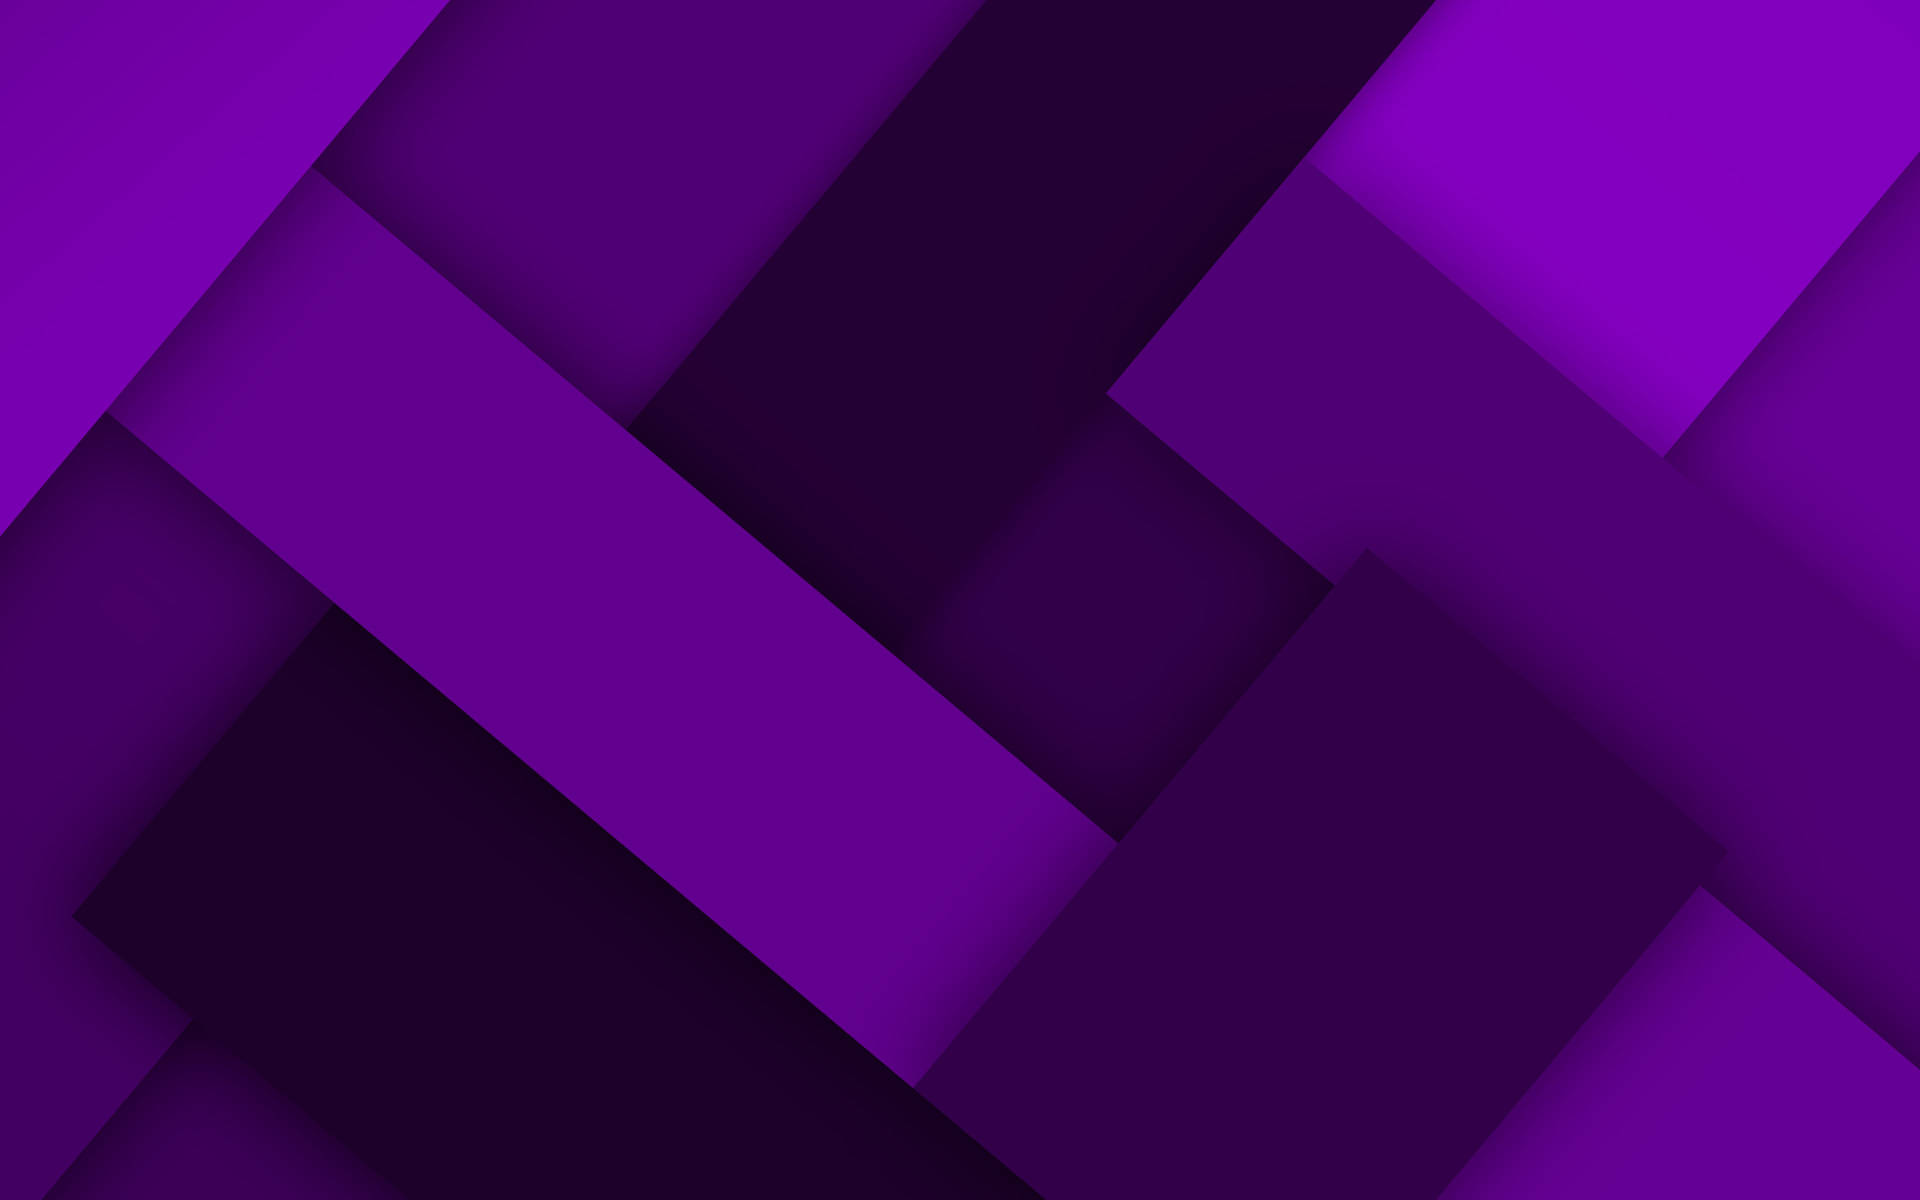 Android Material Design Violet Rectangles